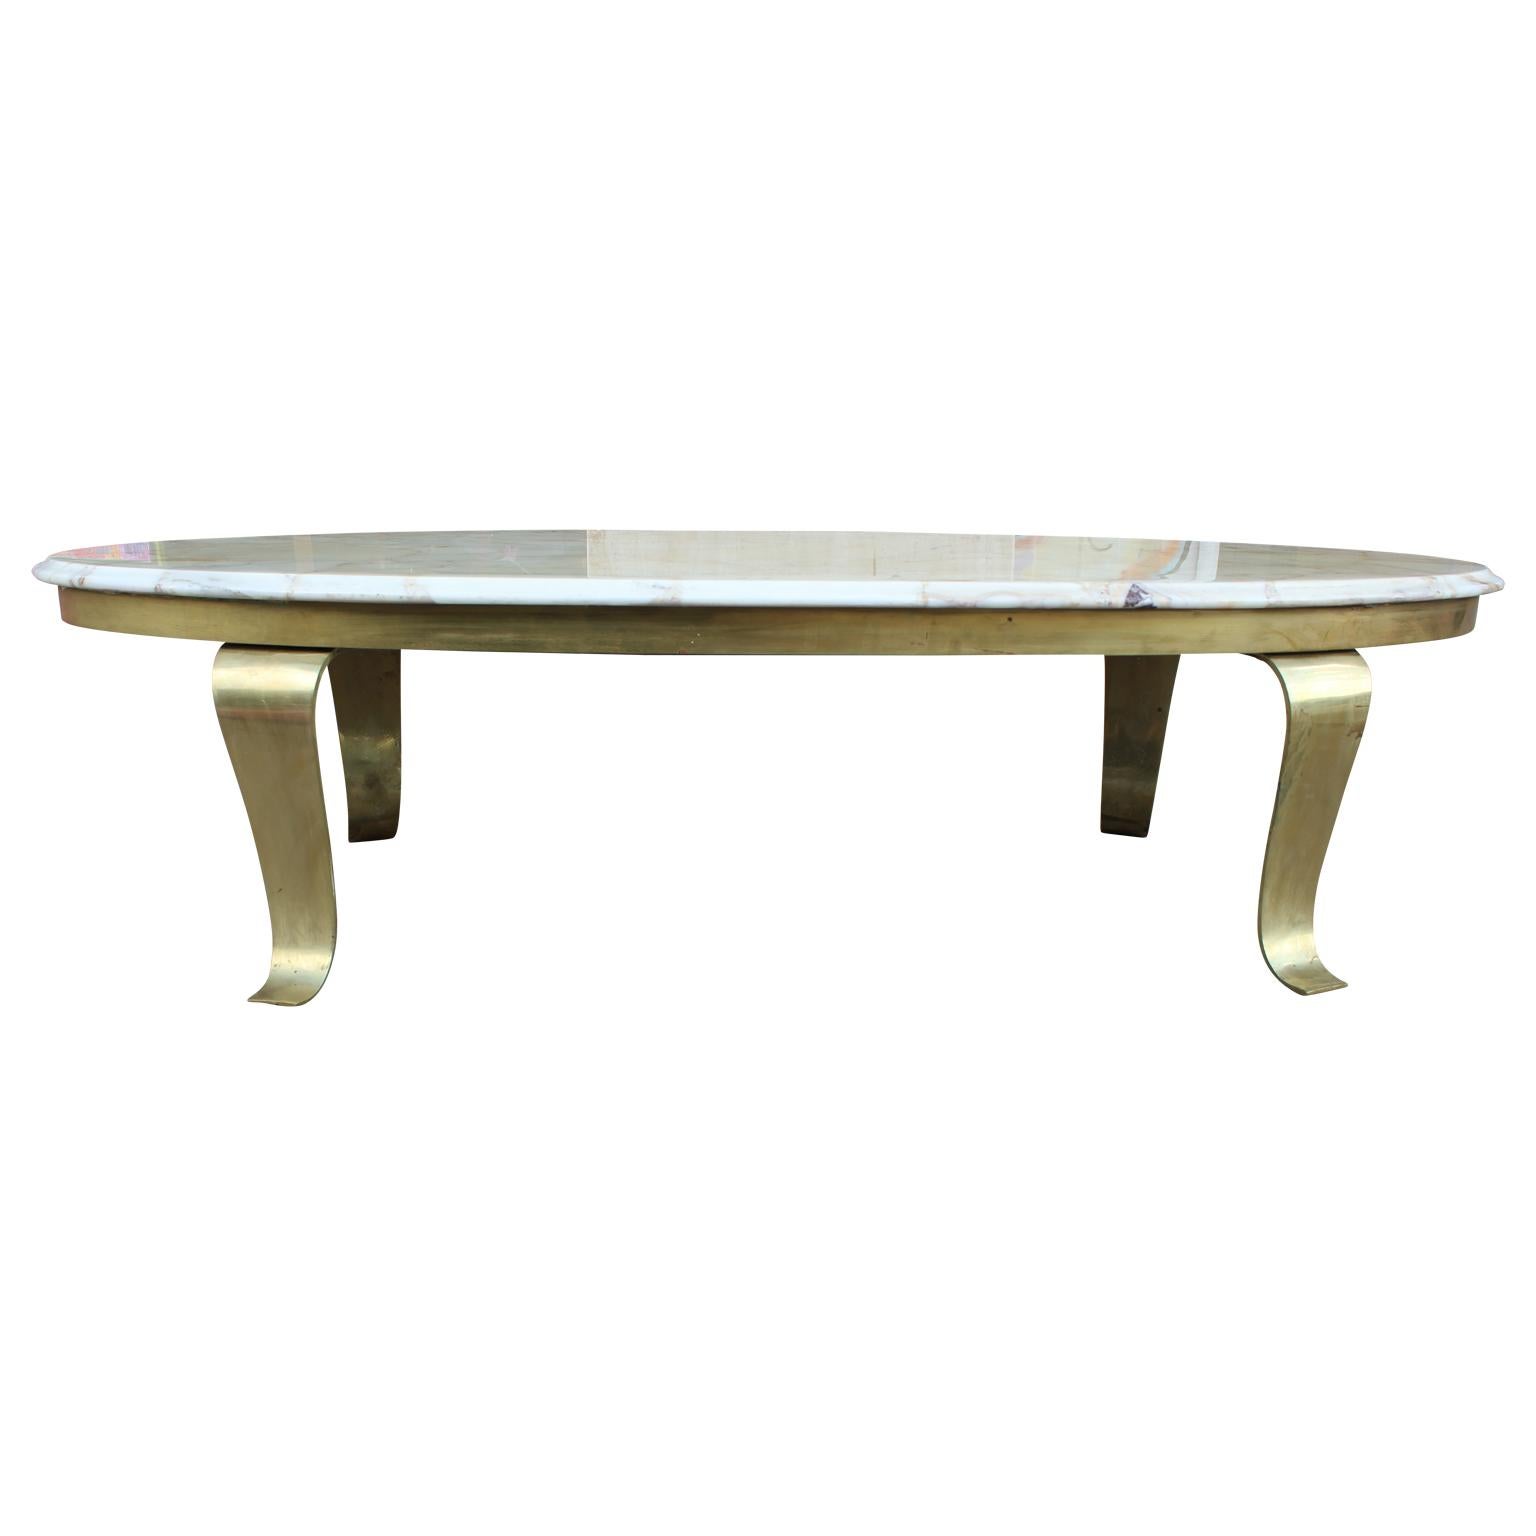 Gorgeous Hollywood Regency oval marble coffee table with brass legs, signed by Muller's Onyx / Muller of Mexico.